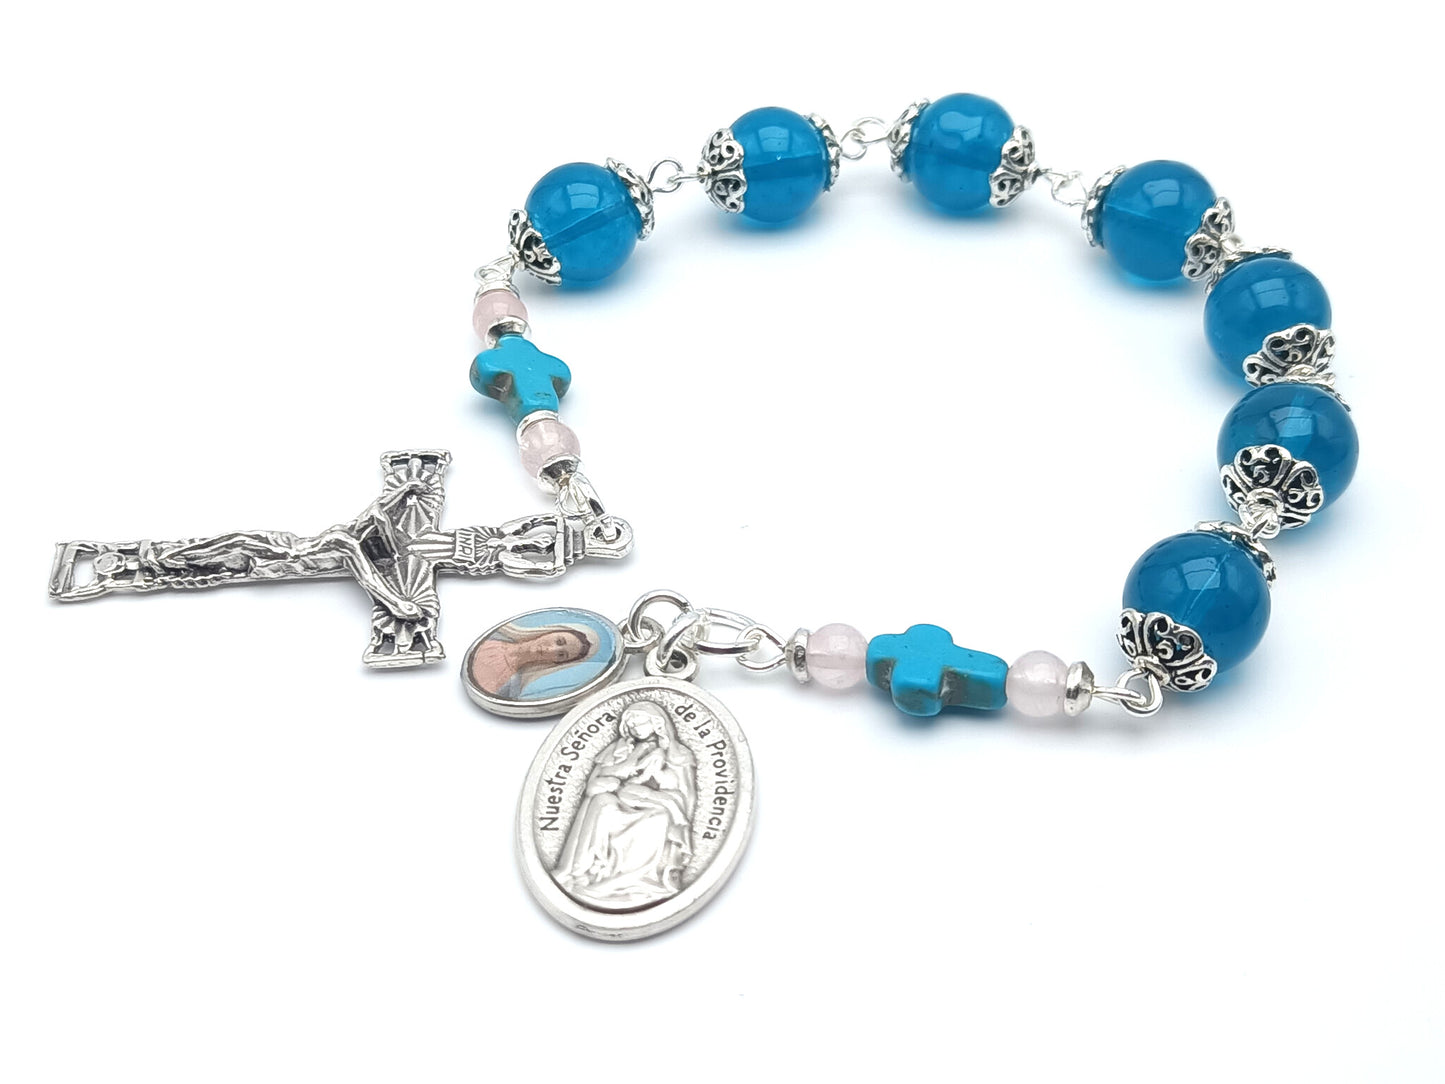 Our Lady of Divine Providence unique rosary bead chaplet with blue glass and turquoise gemstone beads, silver Holy Spirit crucifix and Our Lady medals.